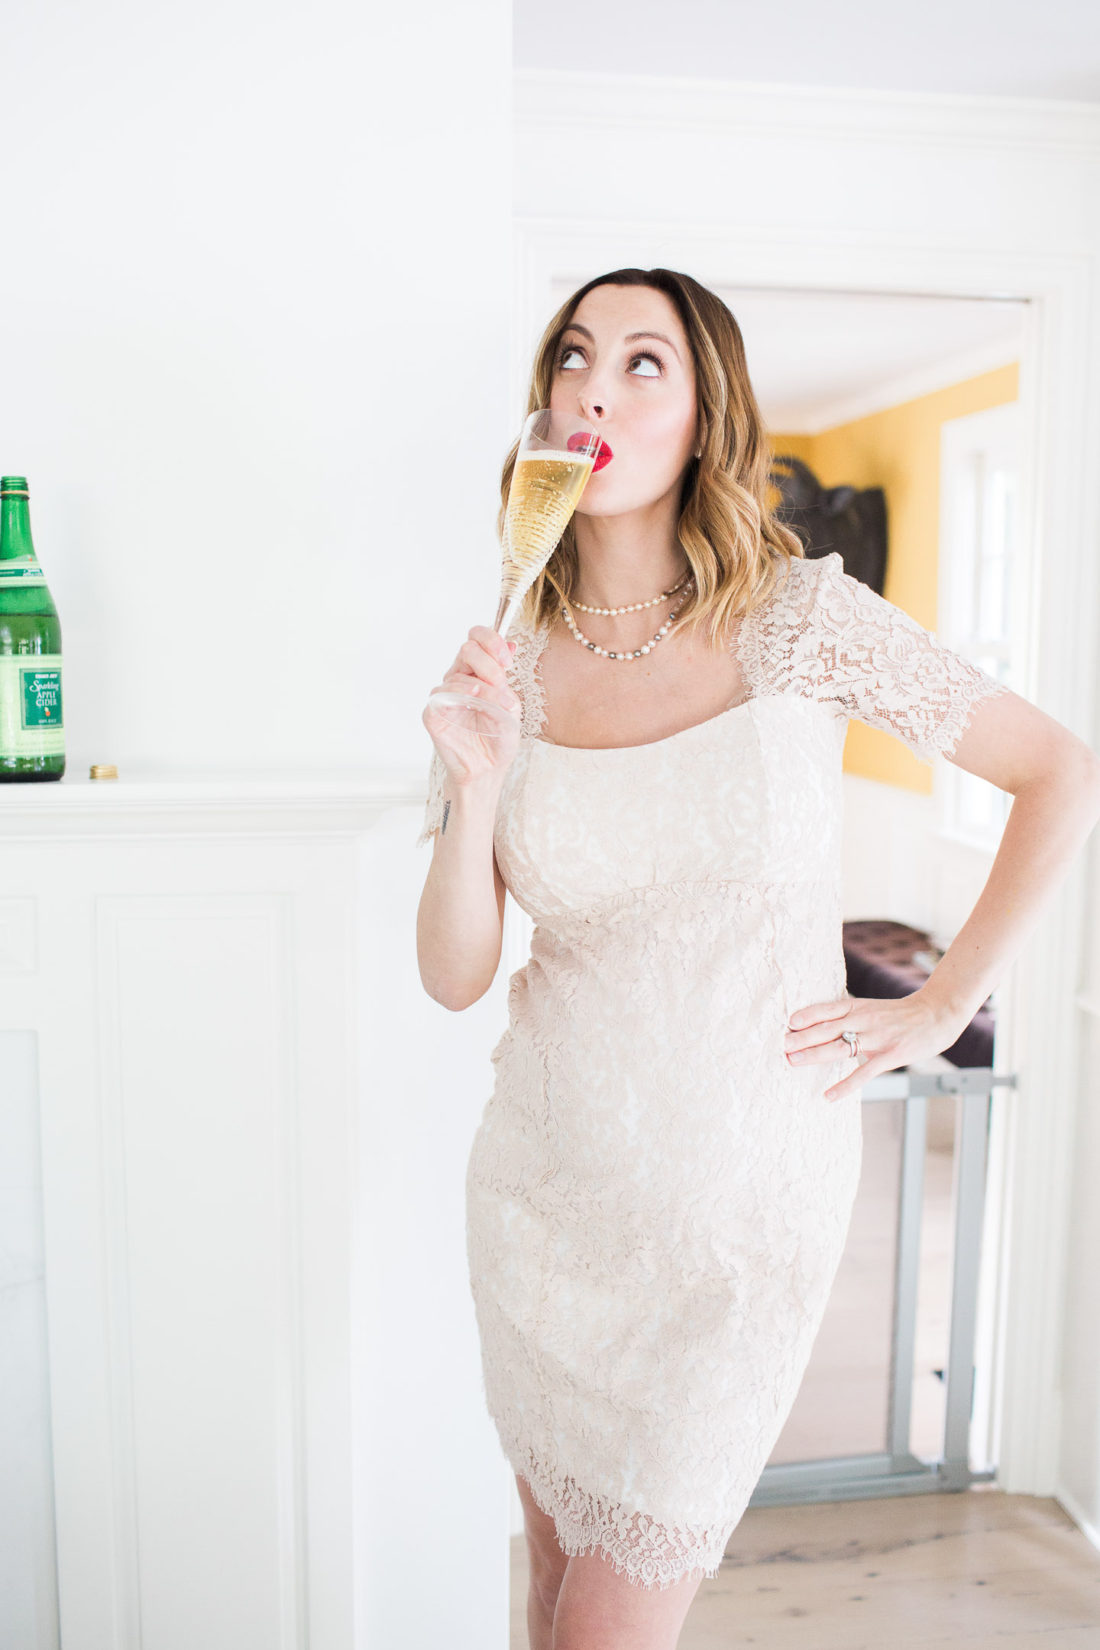 Eva Amurri Martino of lifestyle and motherhood blog Happily Eva After, standing in a champagne colored lace dress and red louboutin platform pumps, holding a glass of sparkling cider in a celebratory toast